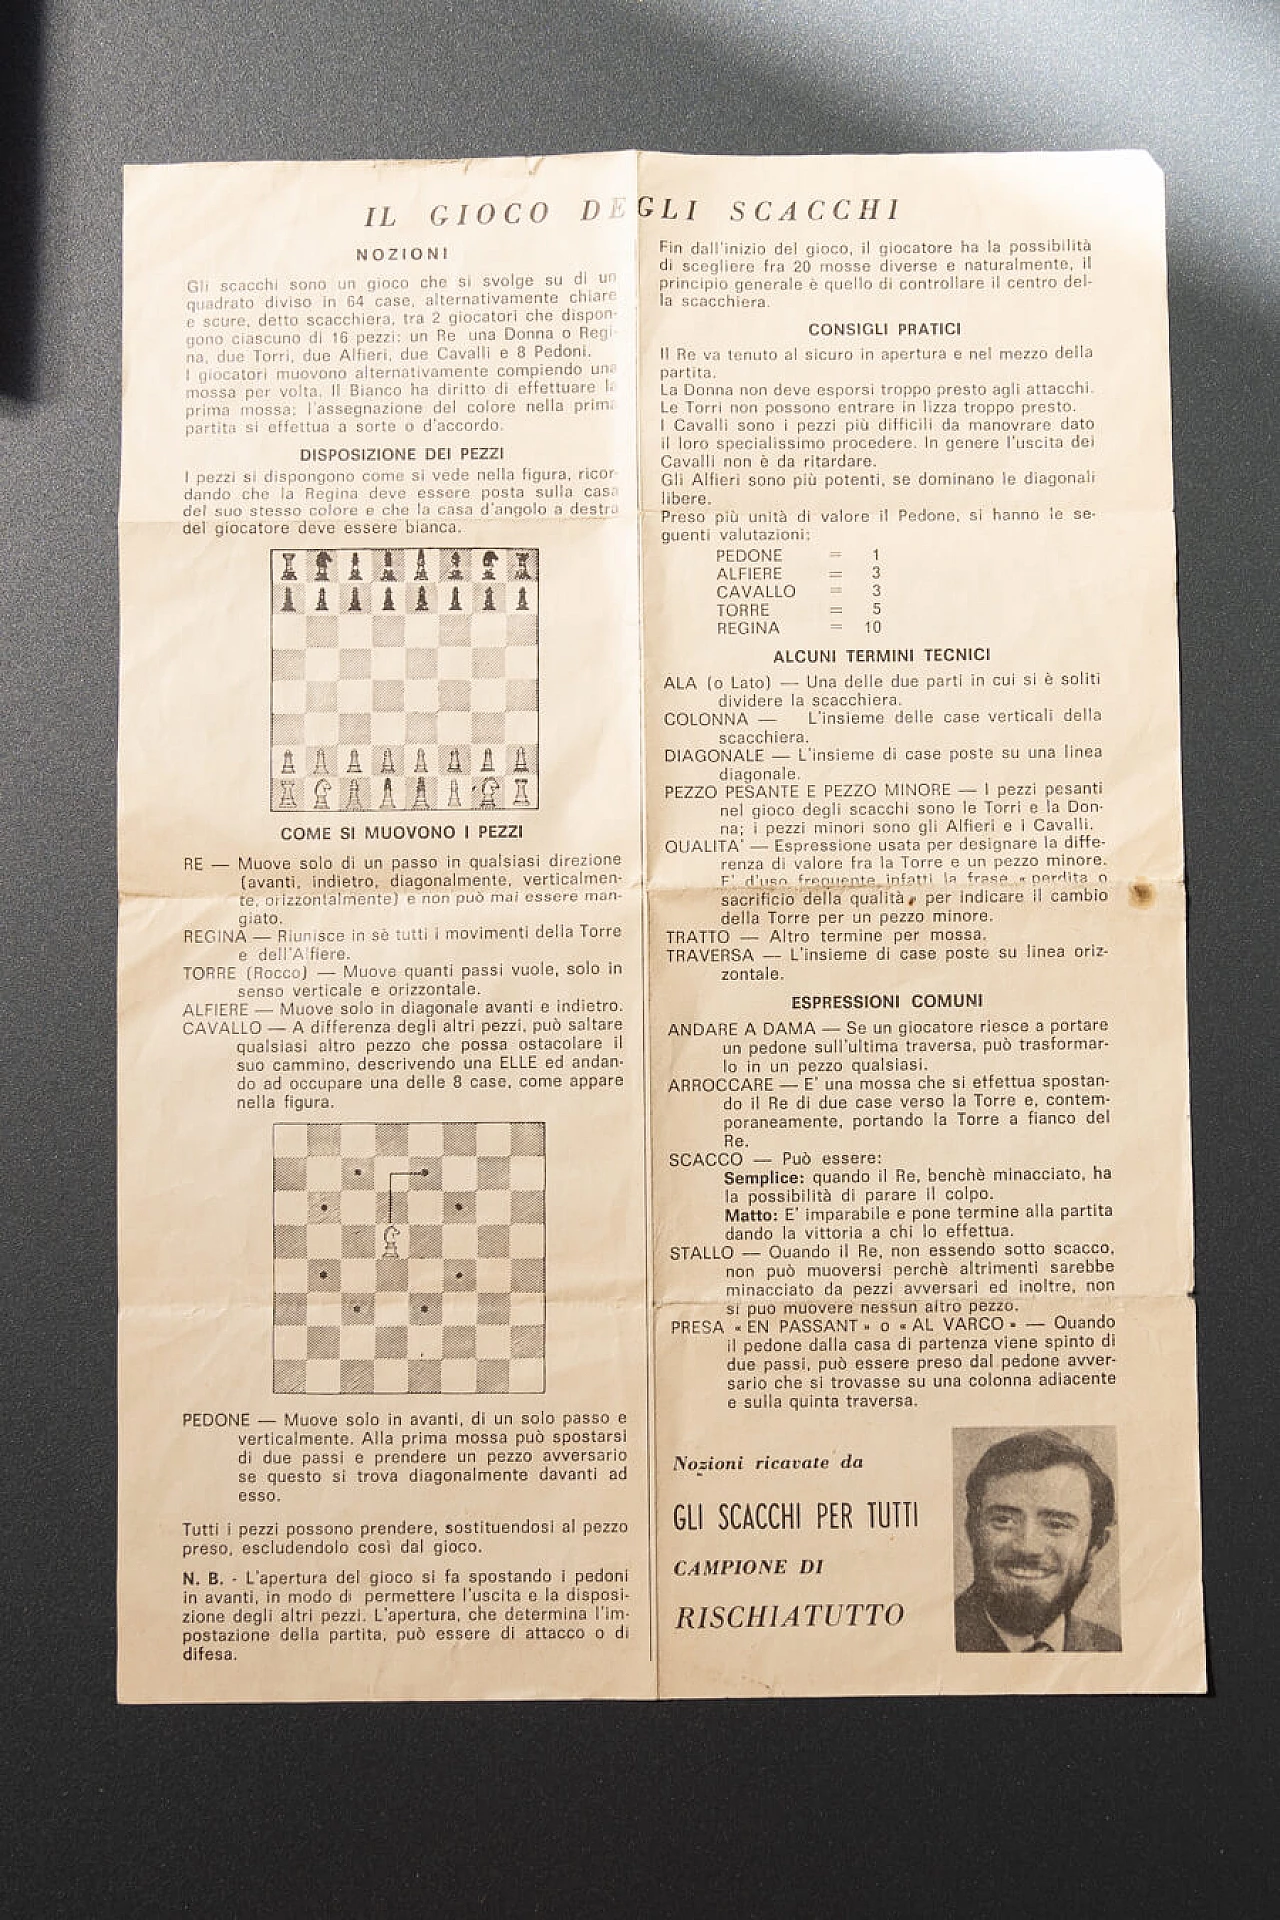 Sporting roulette chessboard, 1970s 5